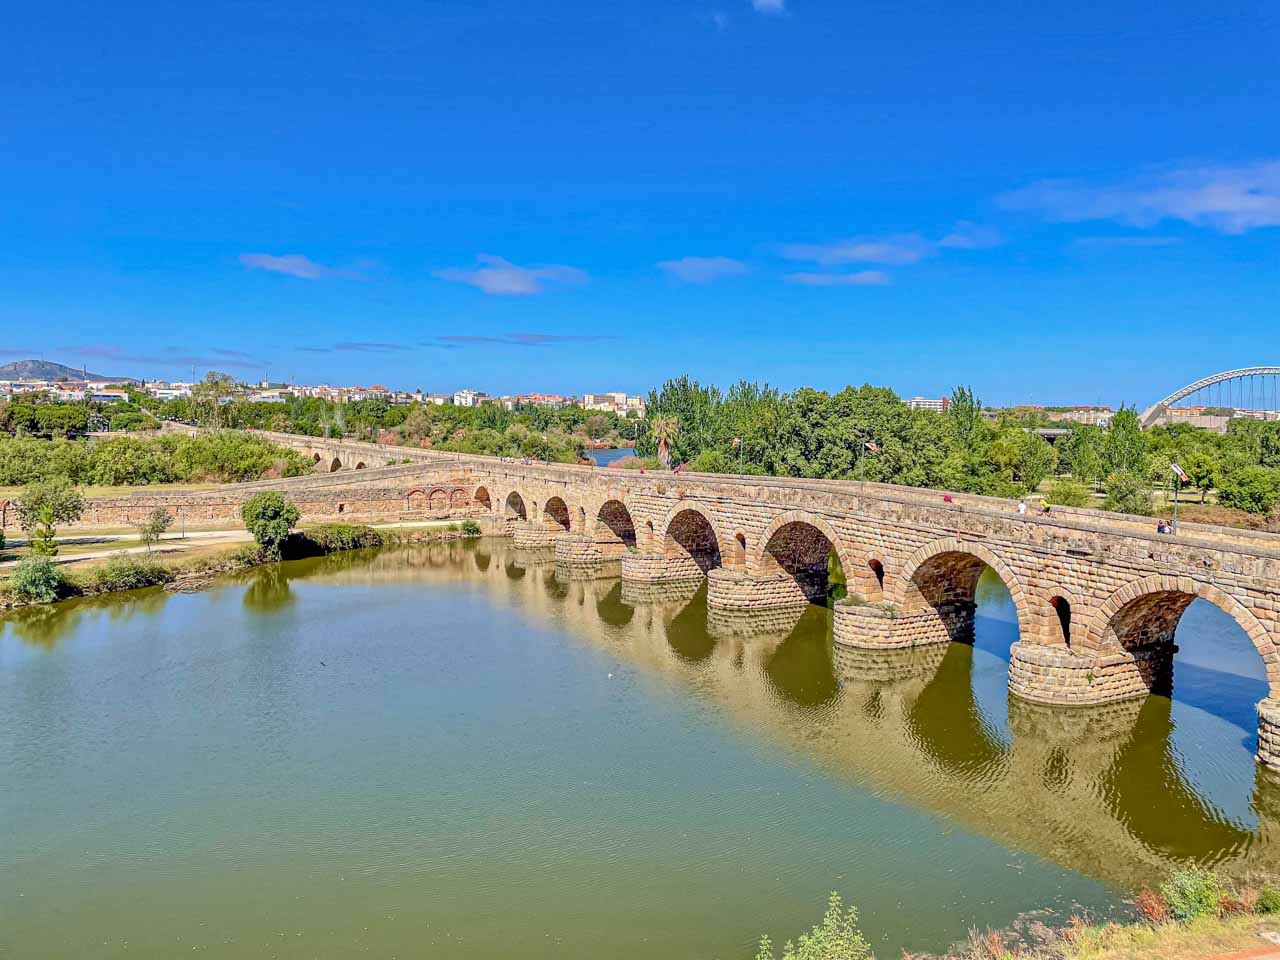 A stone arch bridge built by the ancient Romans is reflected in the river it spans.